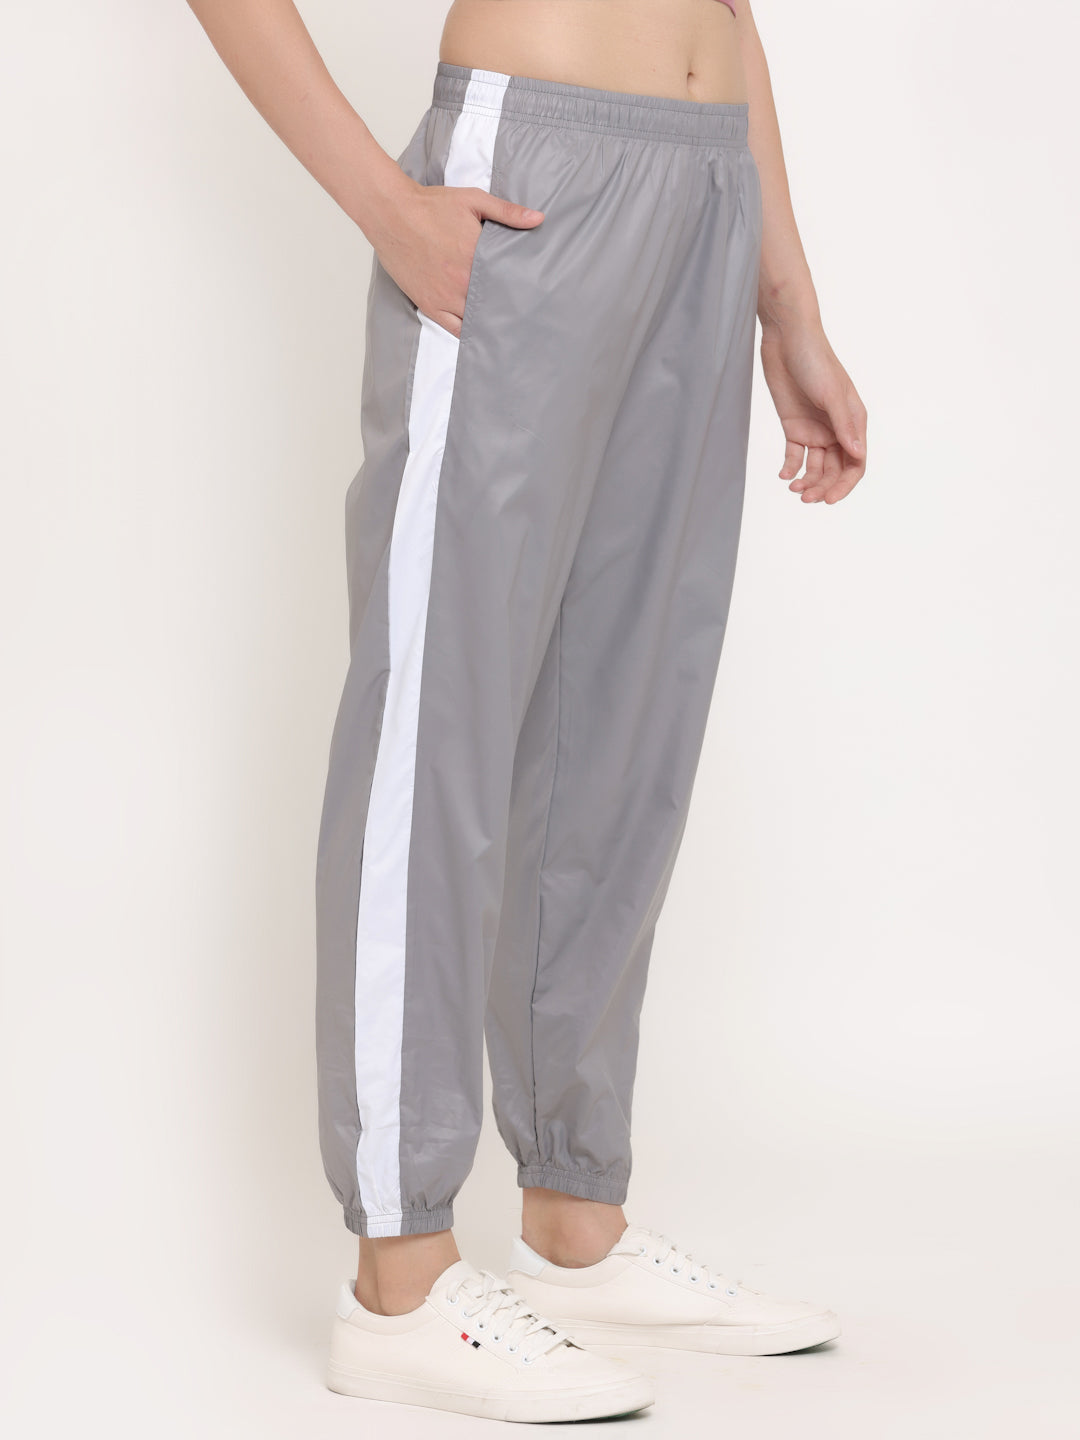 Women's Classic Loose Track Pants by Palm Angels | Coltorti Boutique